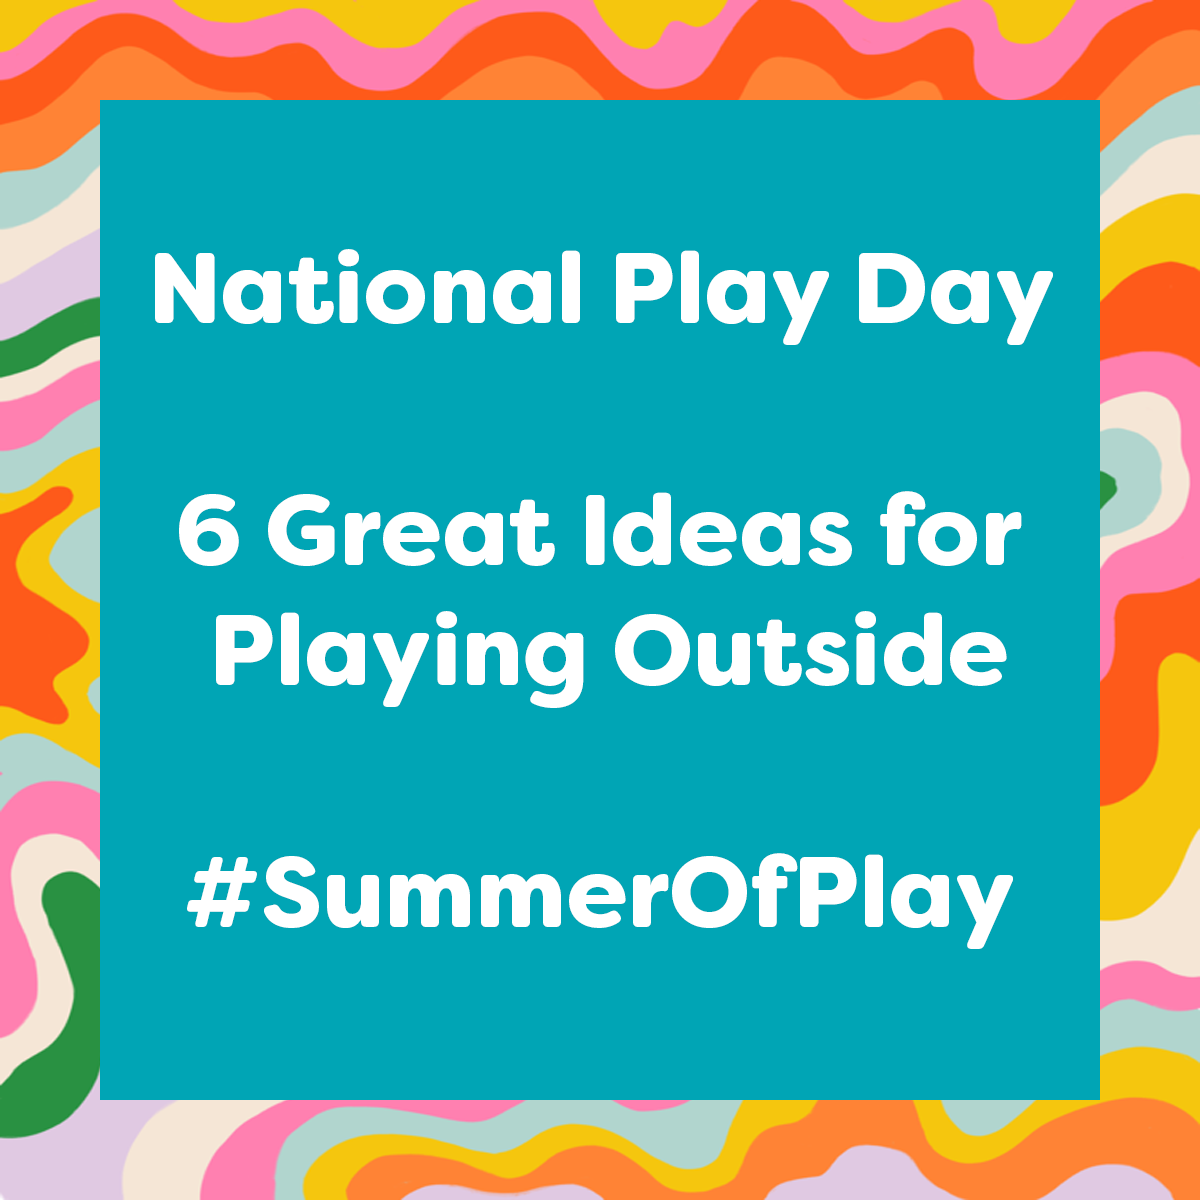 6 Great Ideas for Playing Outside